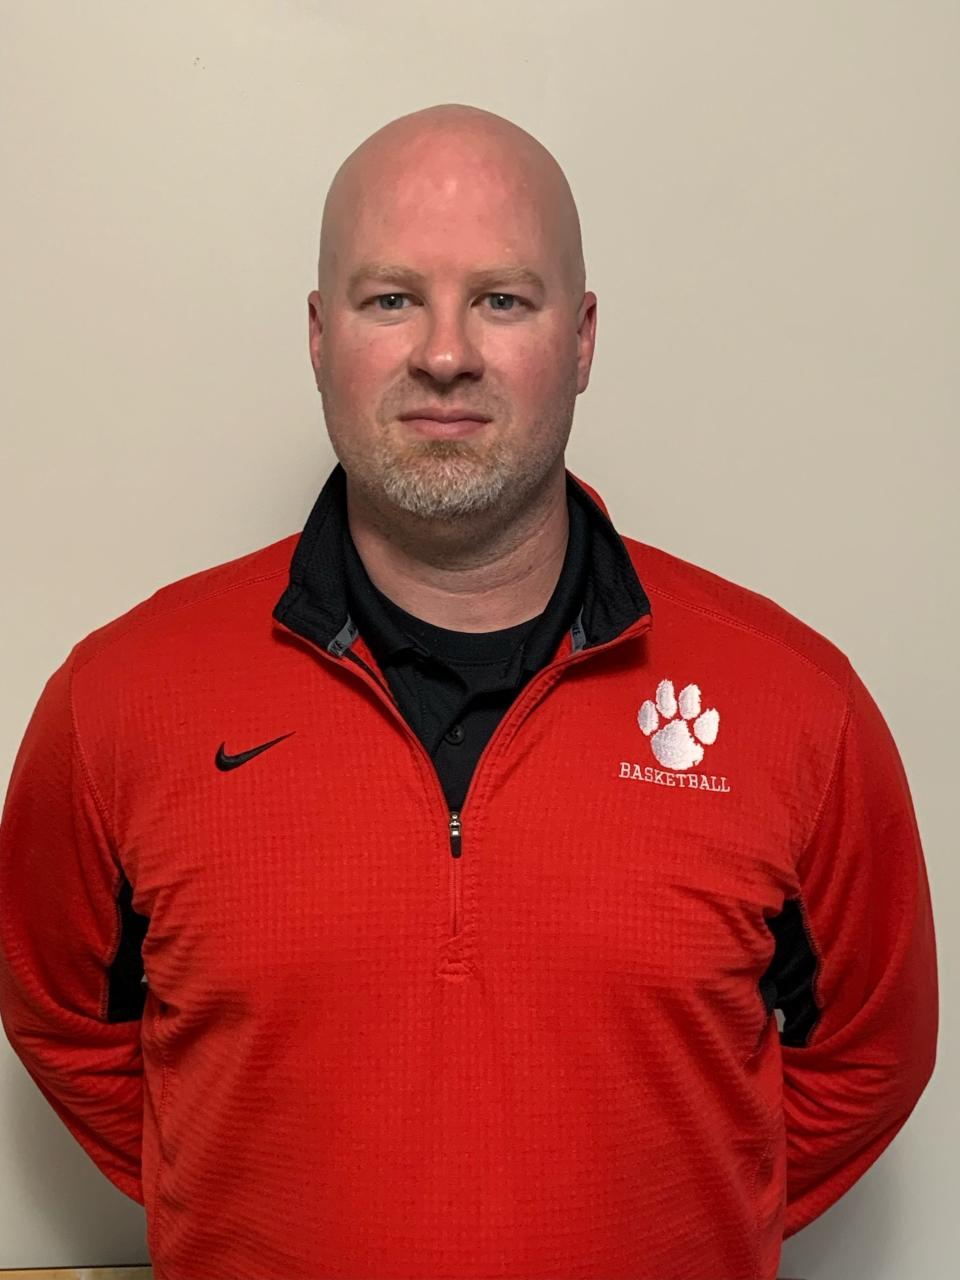 Ross Hart is the newest head basketball coach at Beechwood High School after spending five years as the associate varsity head coach.